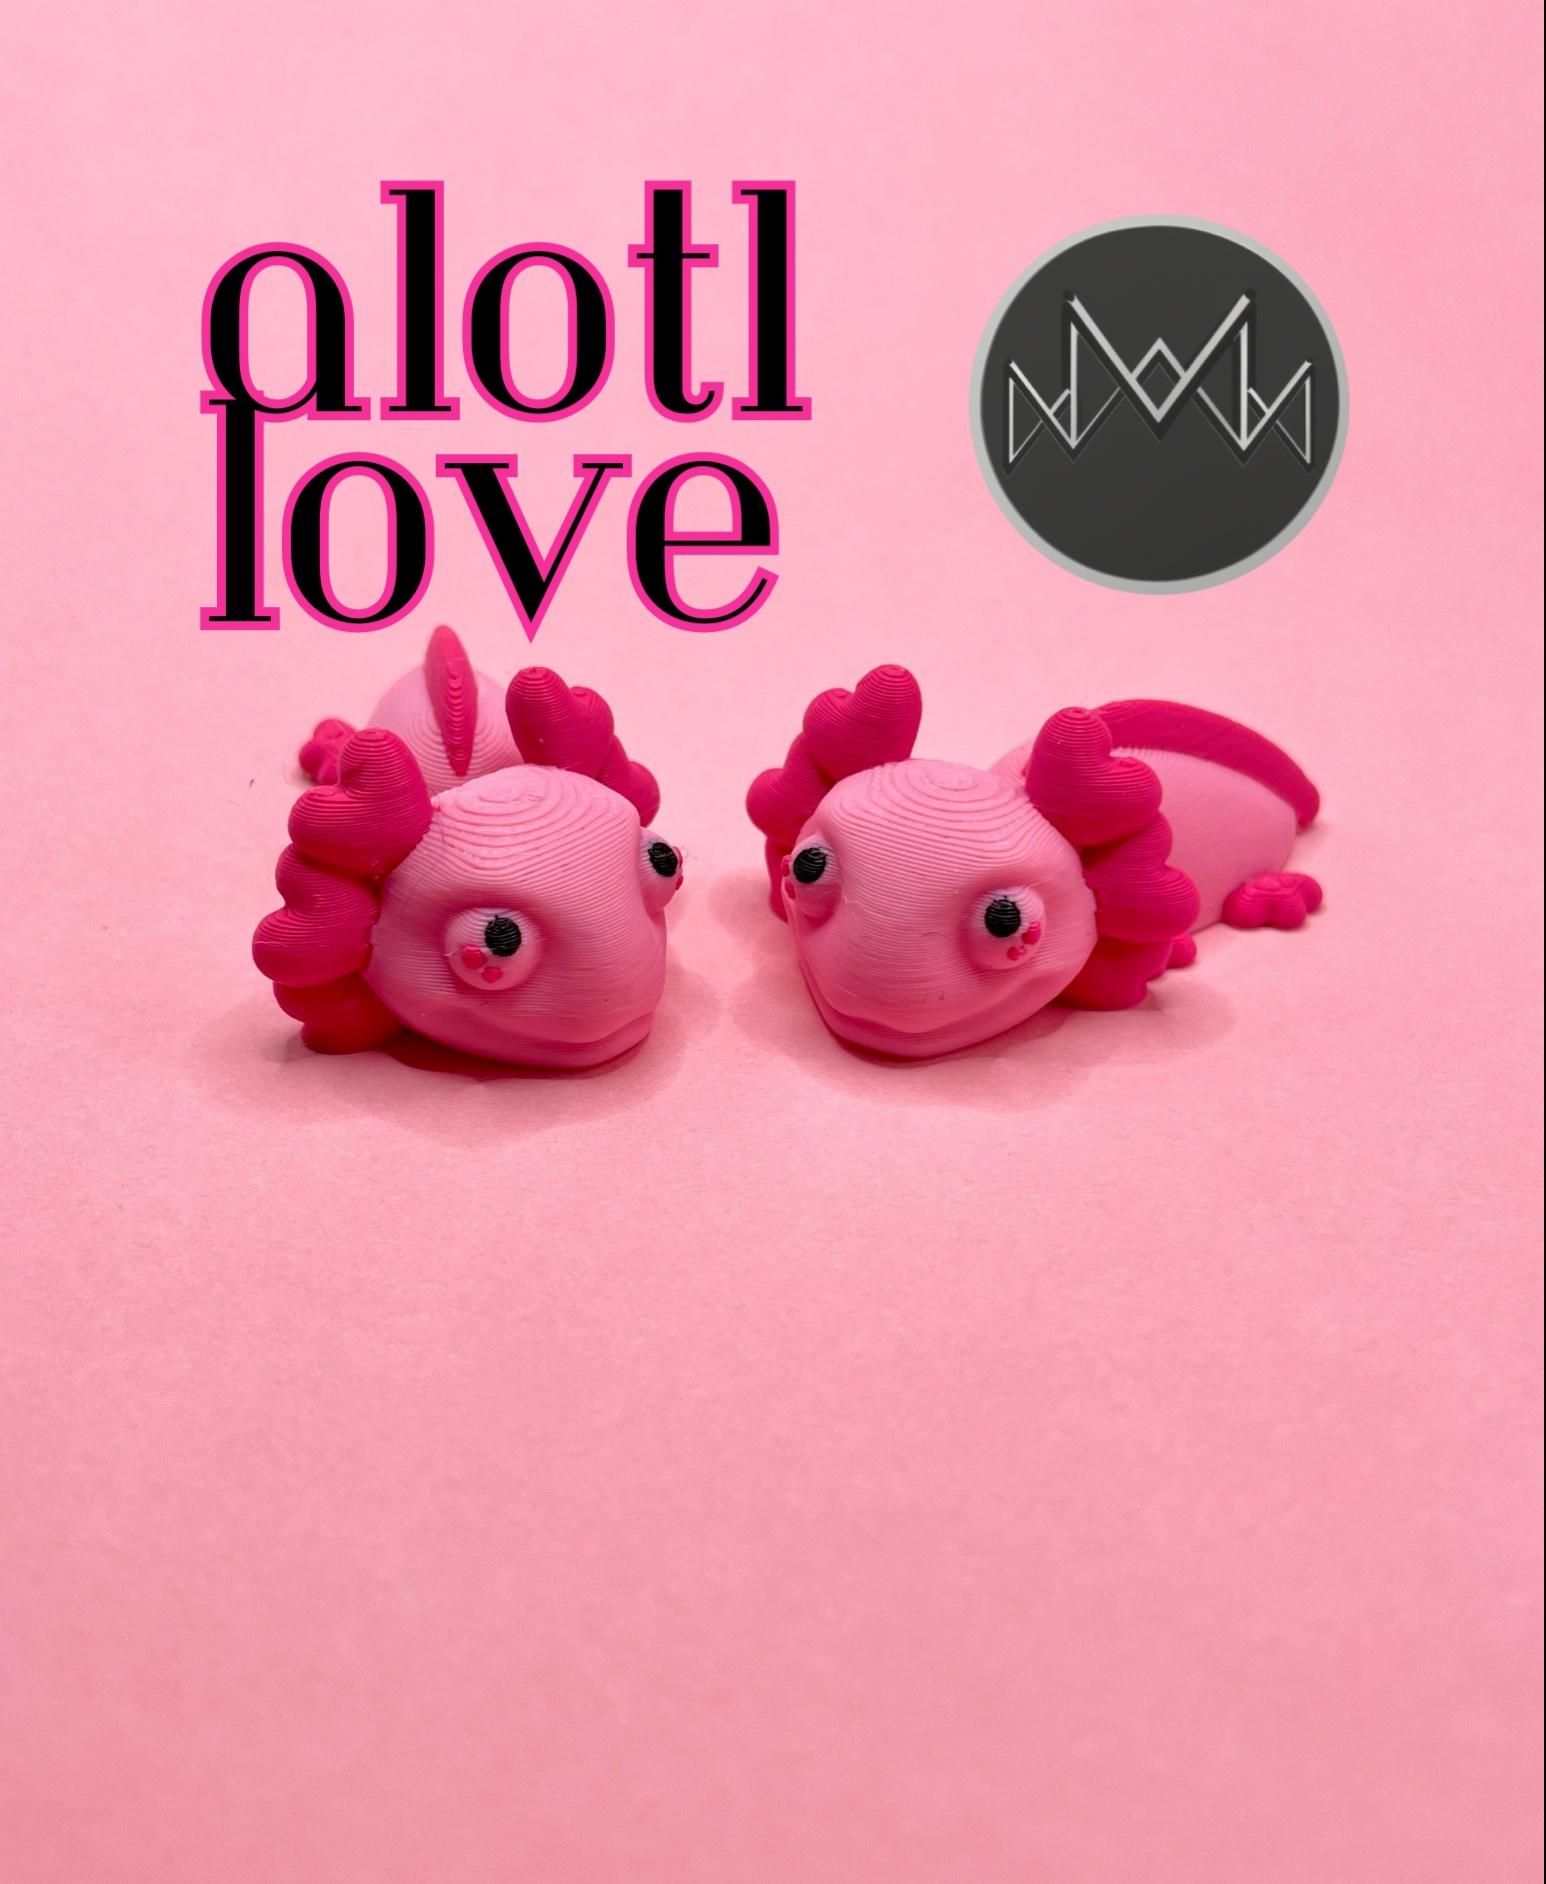 Alotl Love, Little Heart Axolotl - Articulated Snap-Flex Fidget Toy (Loose Joints) - Polymaker Pink Polylite PLA and Magenta Polymax - 3d model